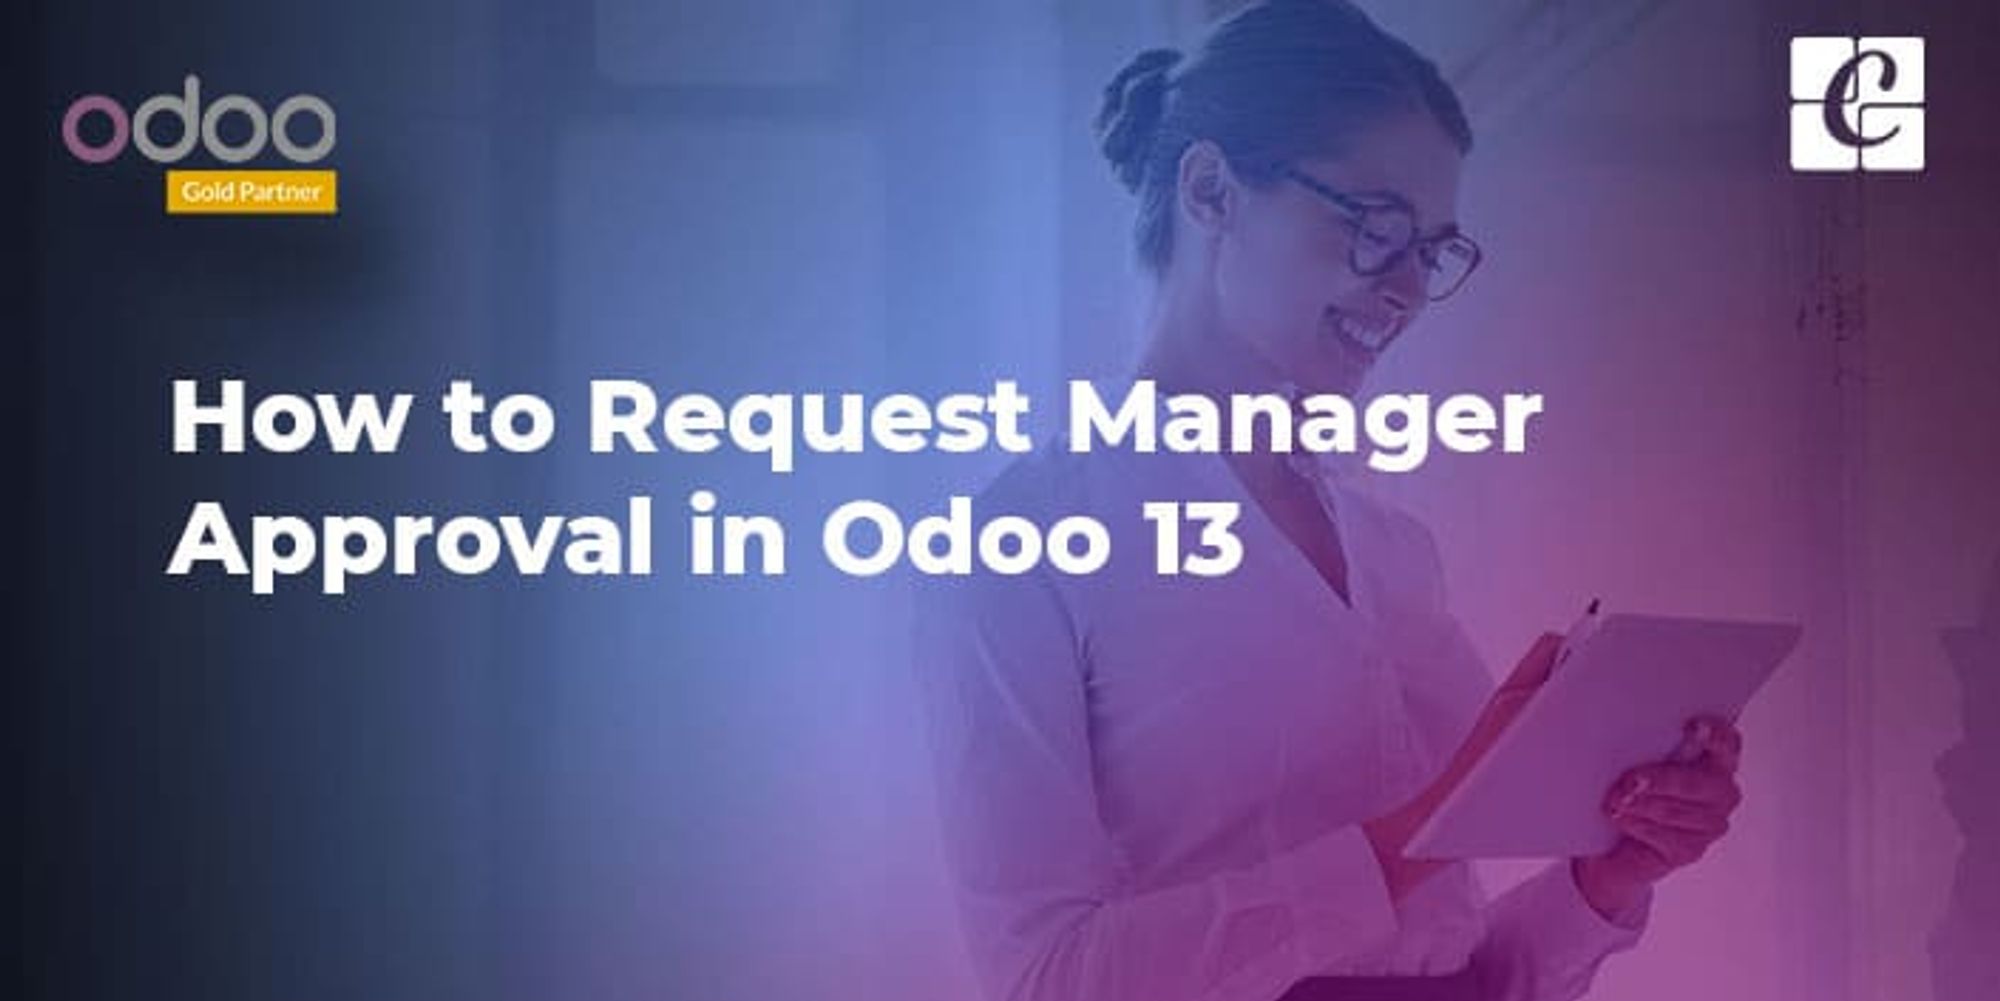 How to Request Manager Approval in Odoo 13